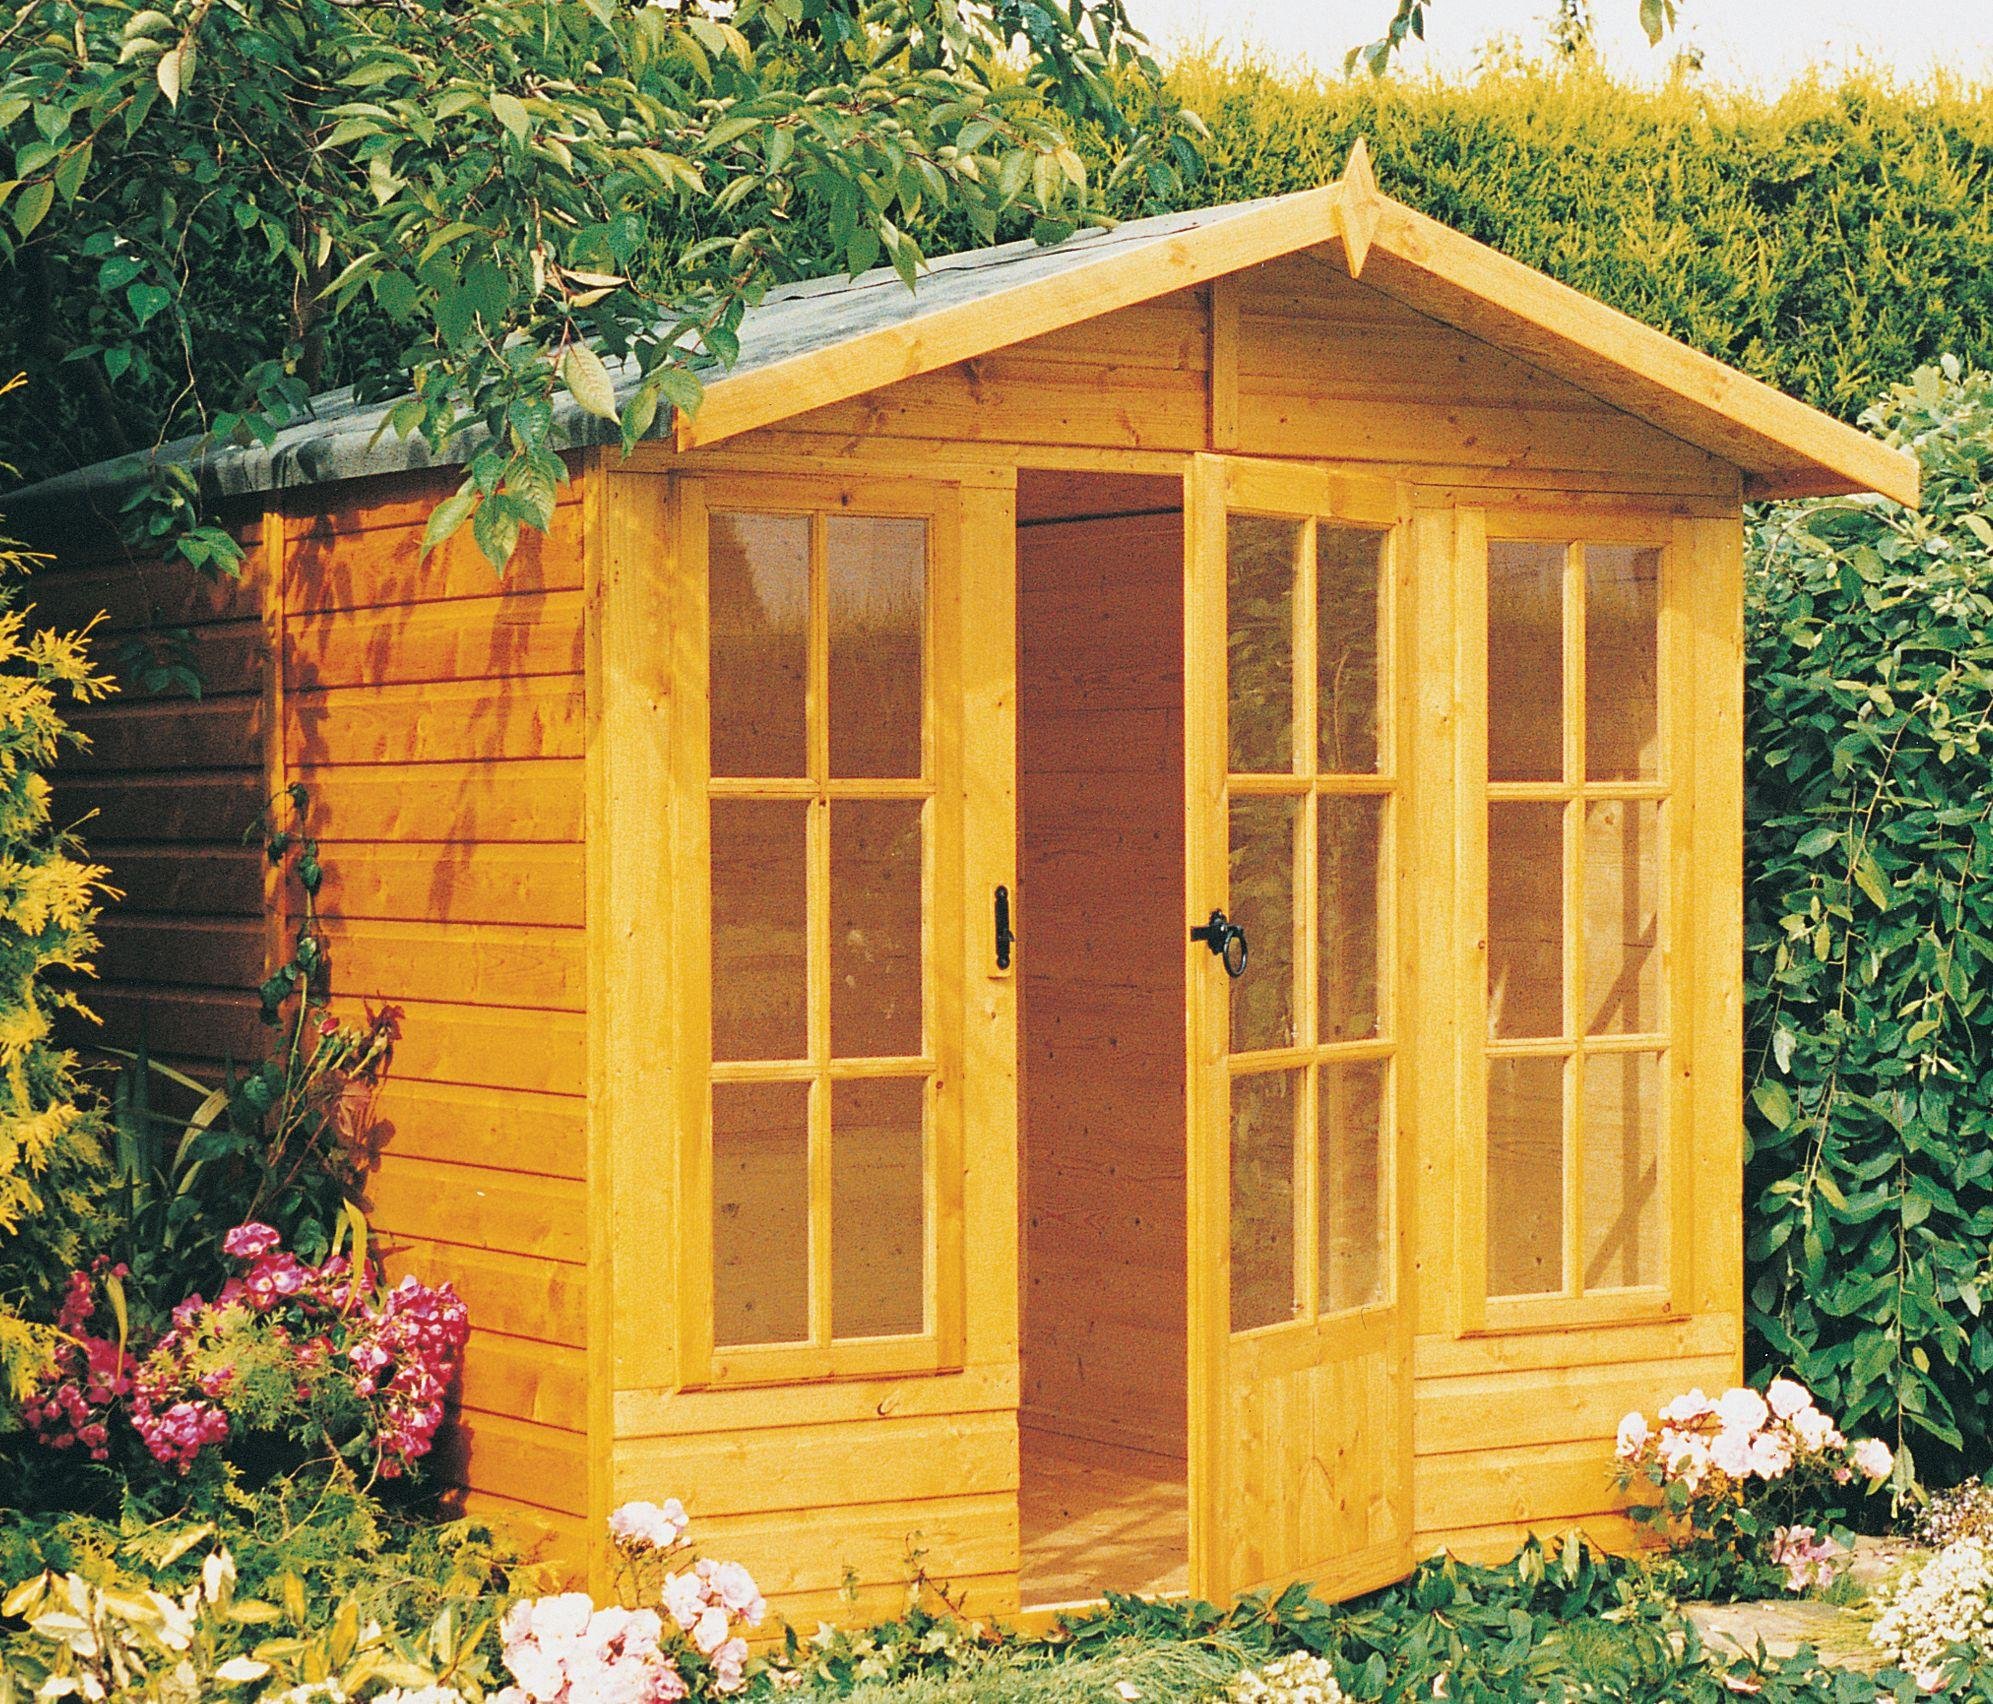 Homewood Chatsworth Wooden Summerhouse 7 x 7ft. Review